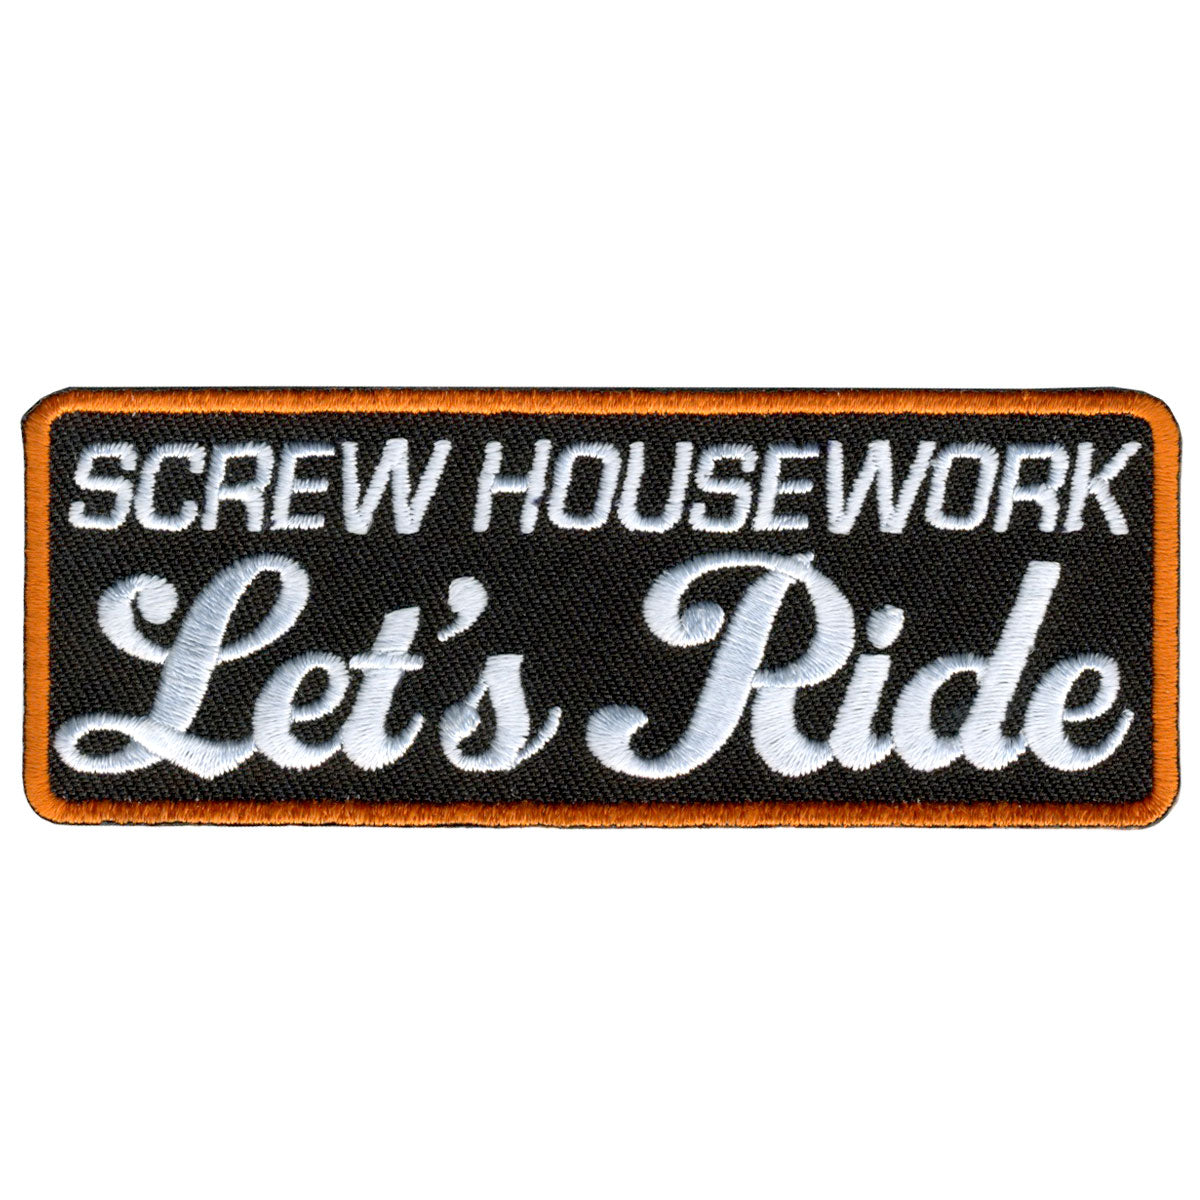 Hot Leathers Lets Ride Embroidered 4" x 2" Patch